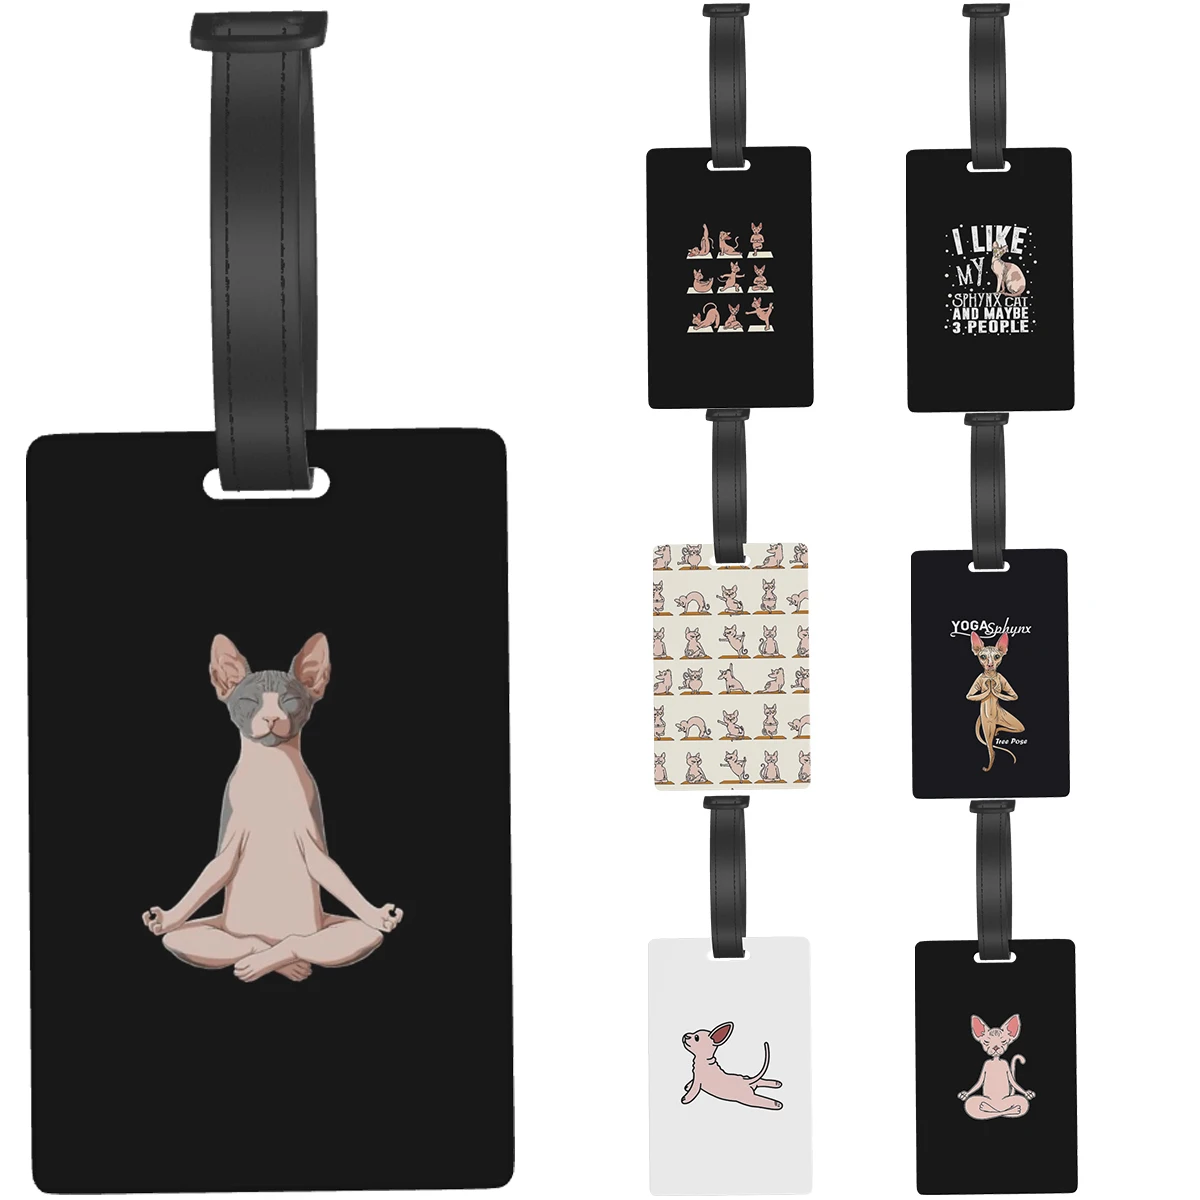 

Sphynx Cats Yoga Luggage Tags Suitcase Accessories Travel PVC Fashion Baggage Boarding Tag Portable Label Holder ID Name Address